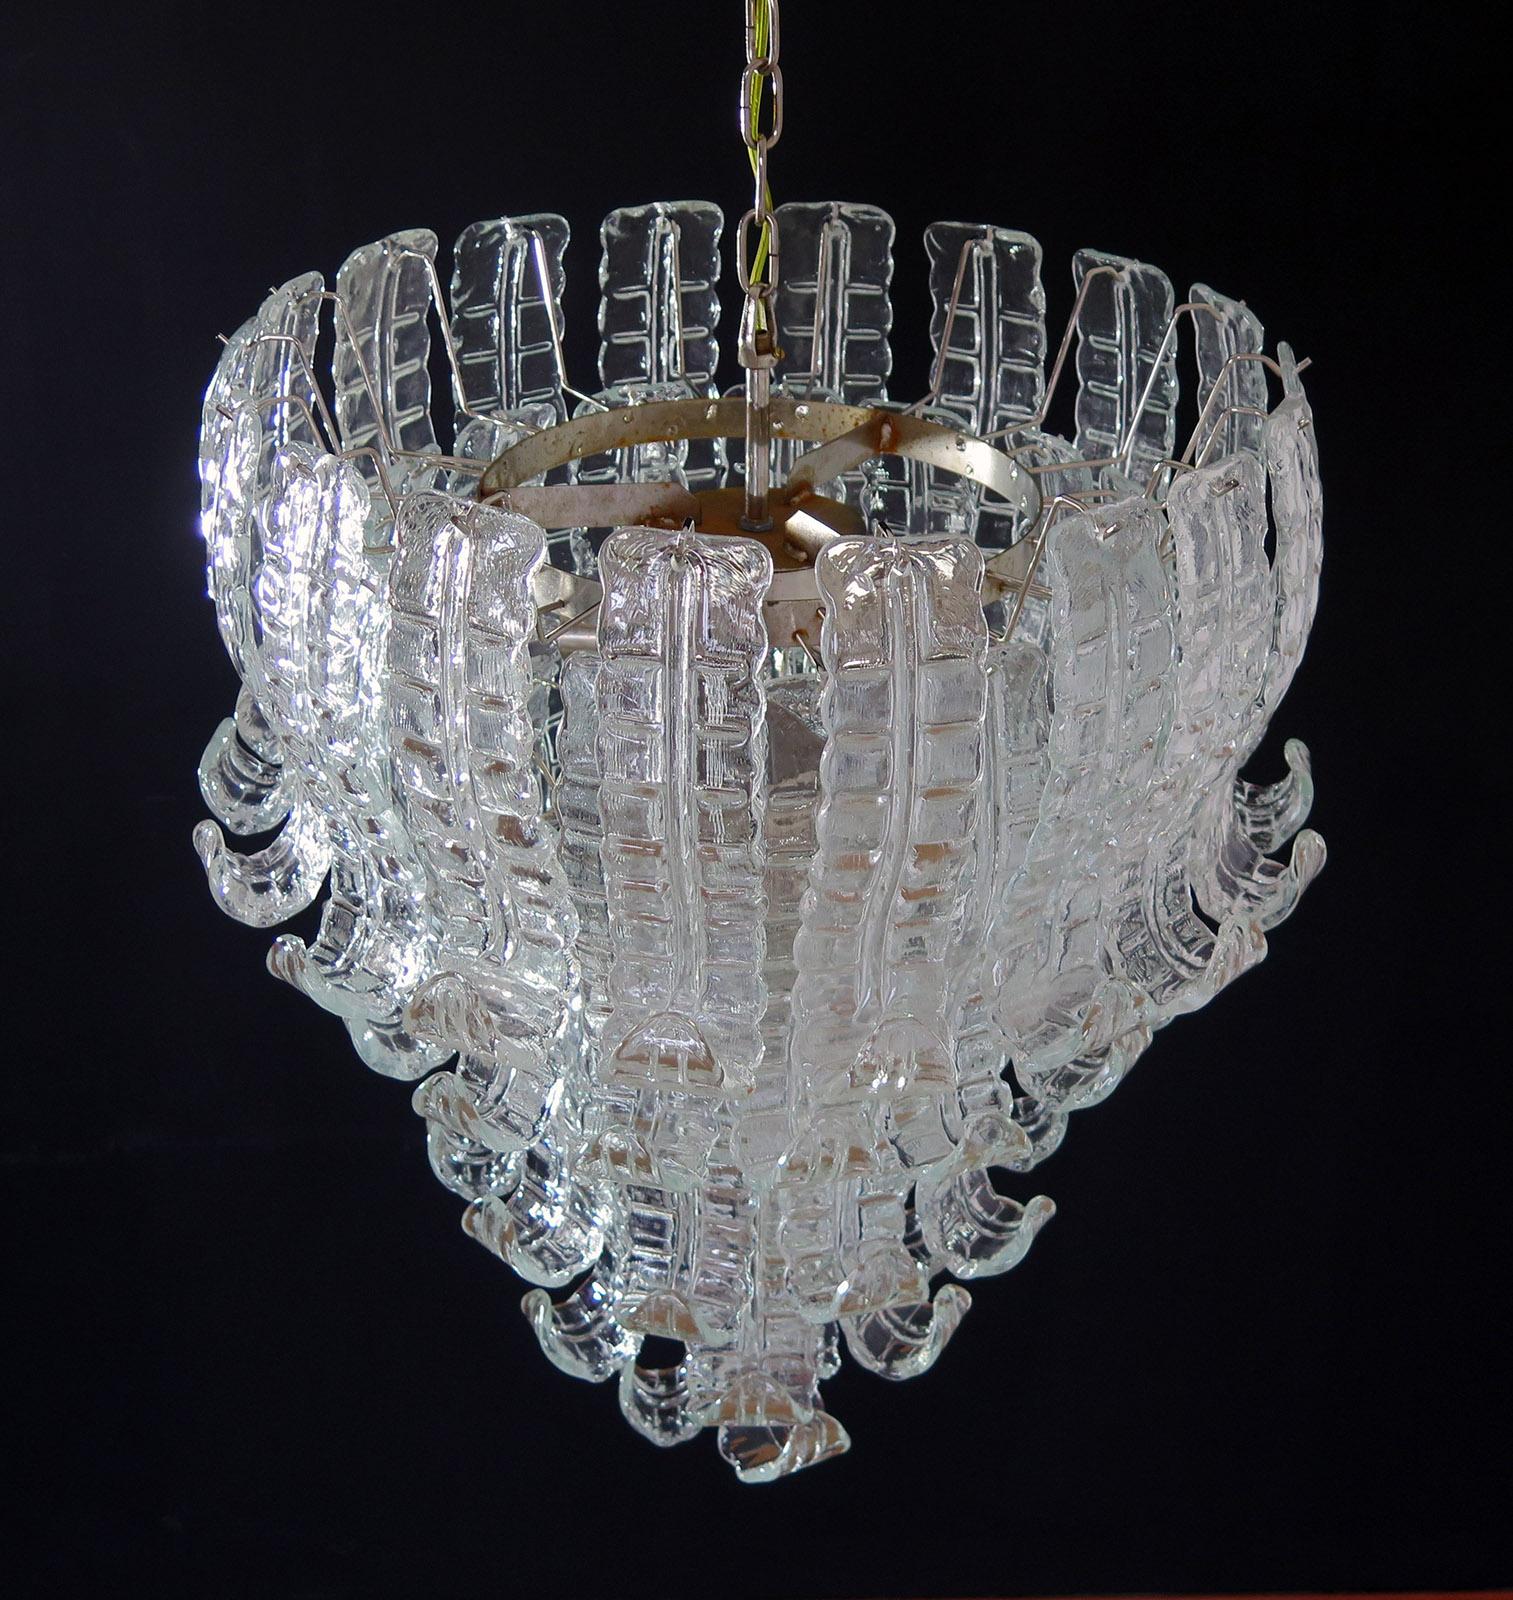 Beautiful and huge Italian Murano chandelier composed of 52 splendid transparent glasses that give a very elegant look
Period: 1970s
Dimensions: 55.10 inches (140 cm) height with chain; 31.50 inches (80 cm) height without chain; 27.55 inches (70 cm)